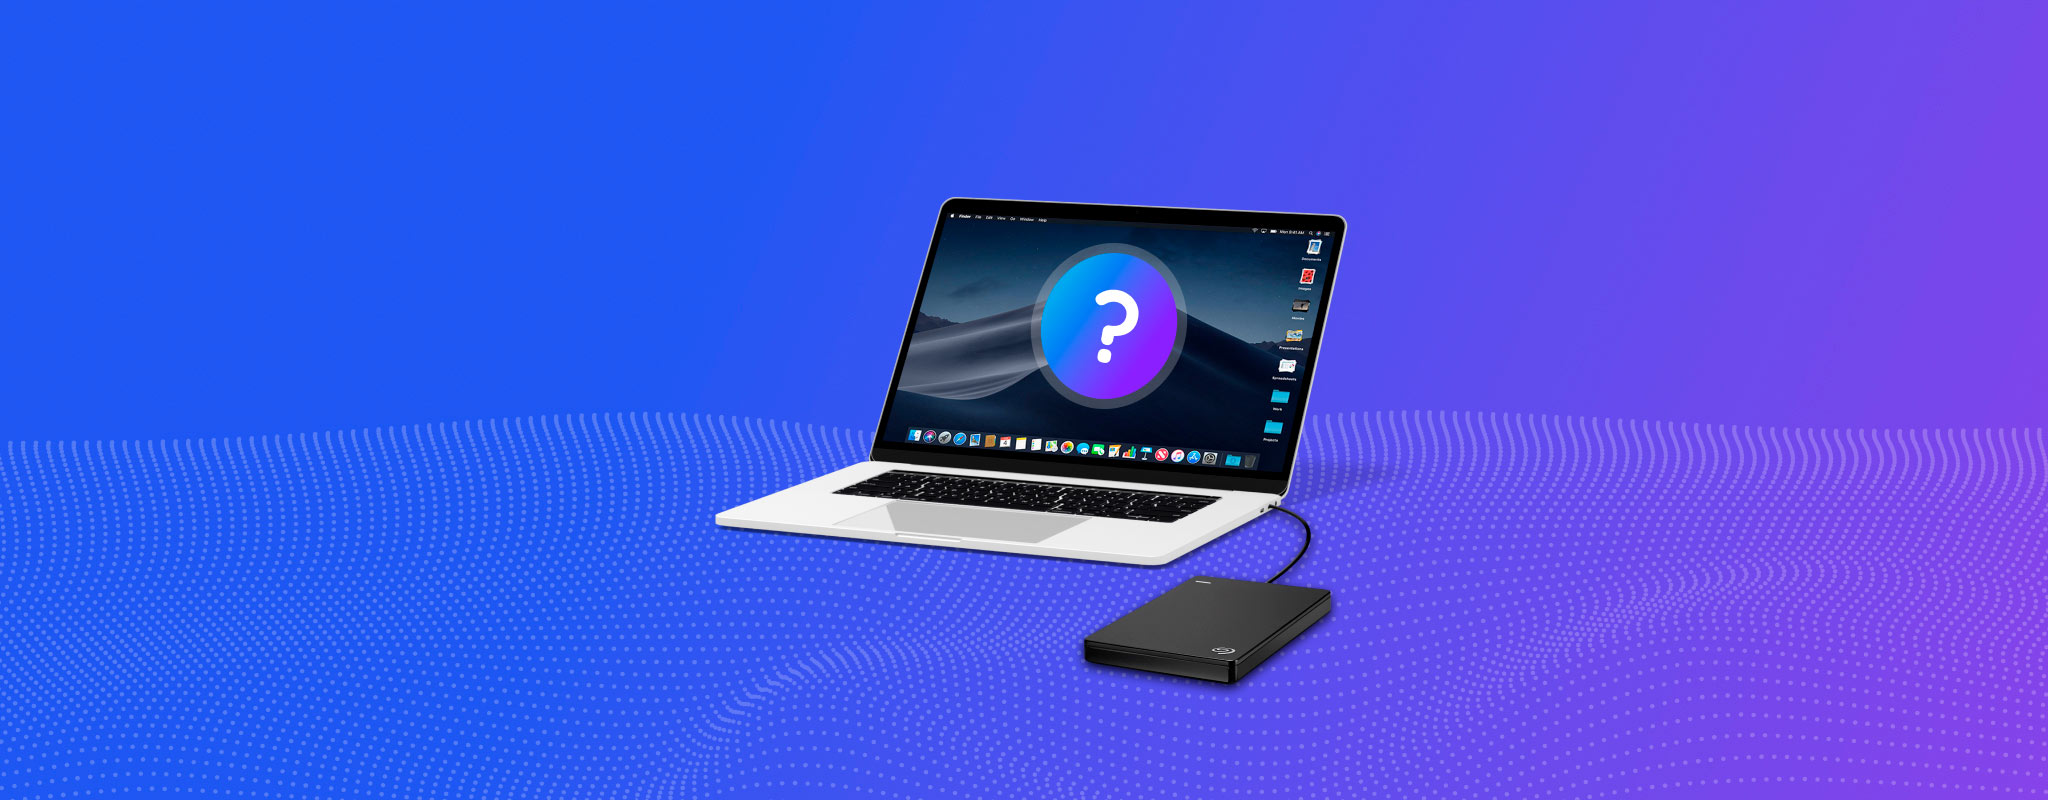 Professor Kostume Lodge External Hard Drive Is Not Showing Up on Mac | 7 Solutions